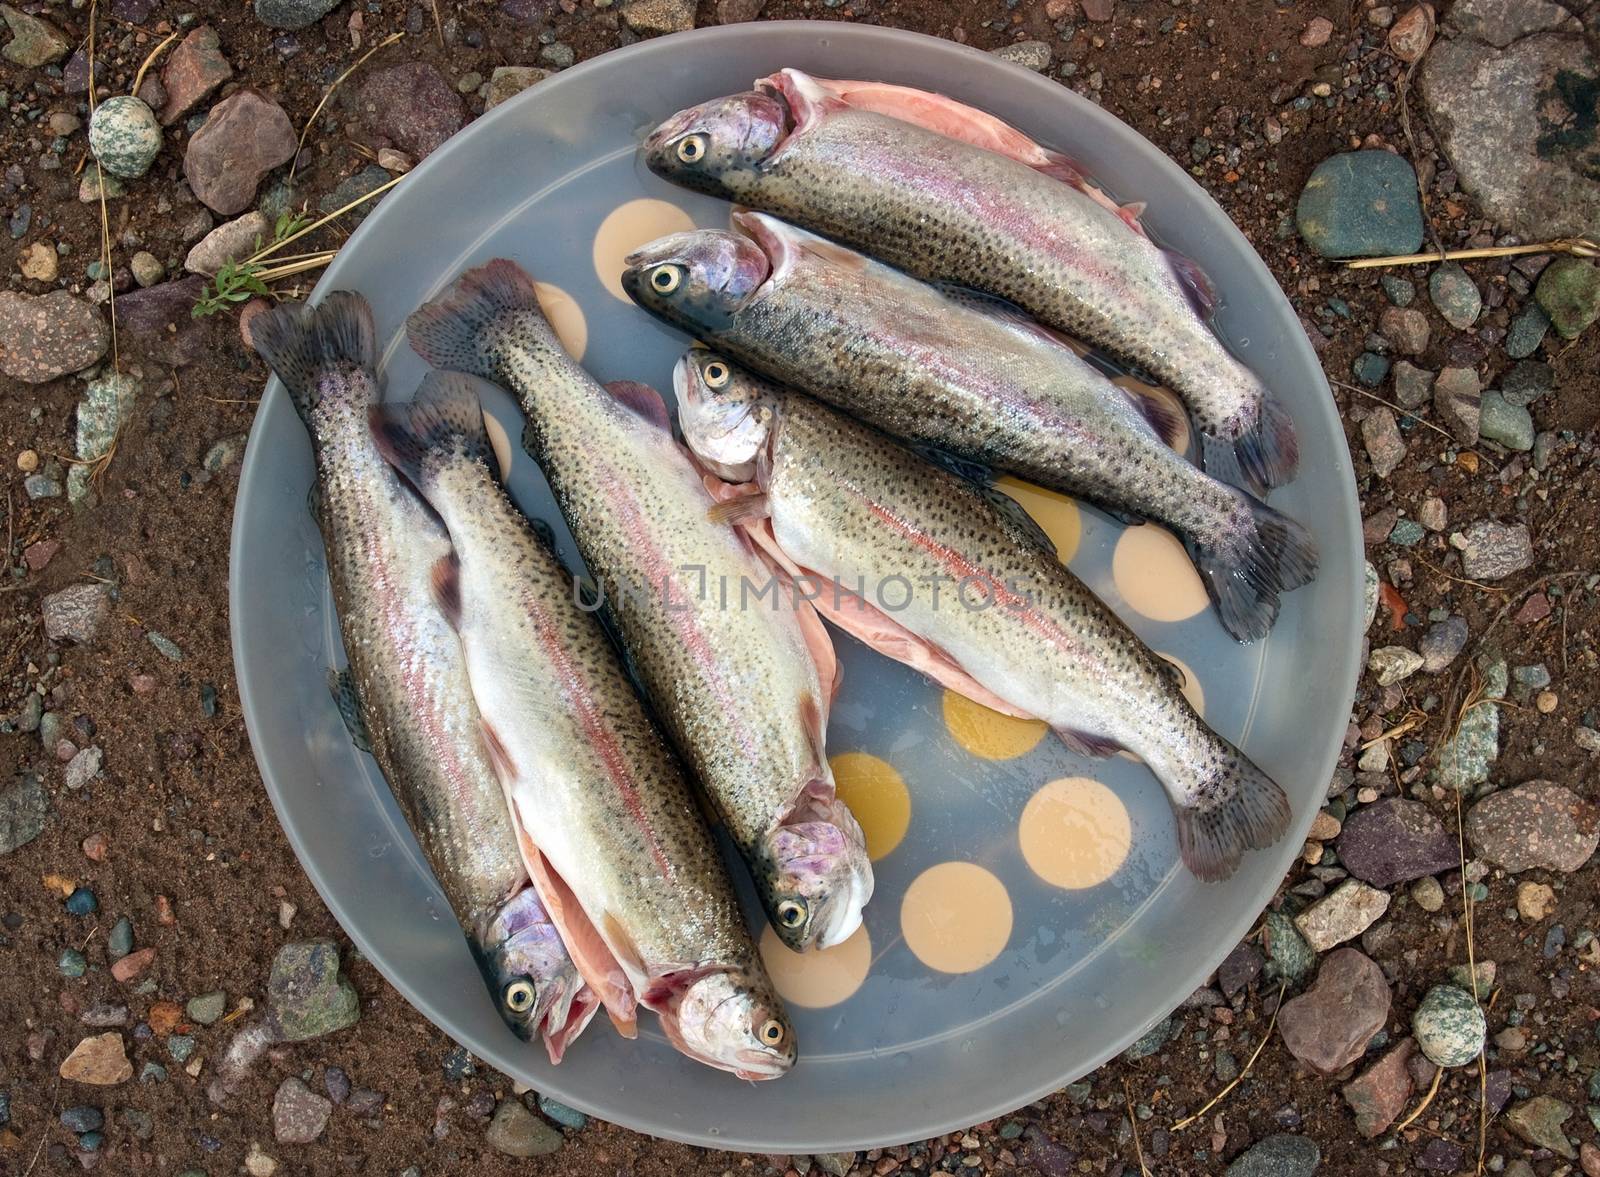 A rainbow trout waiting in dish, to be fried.